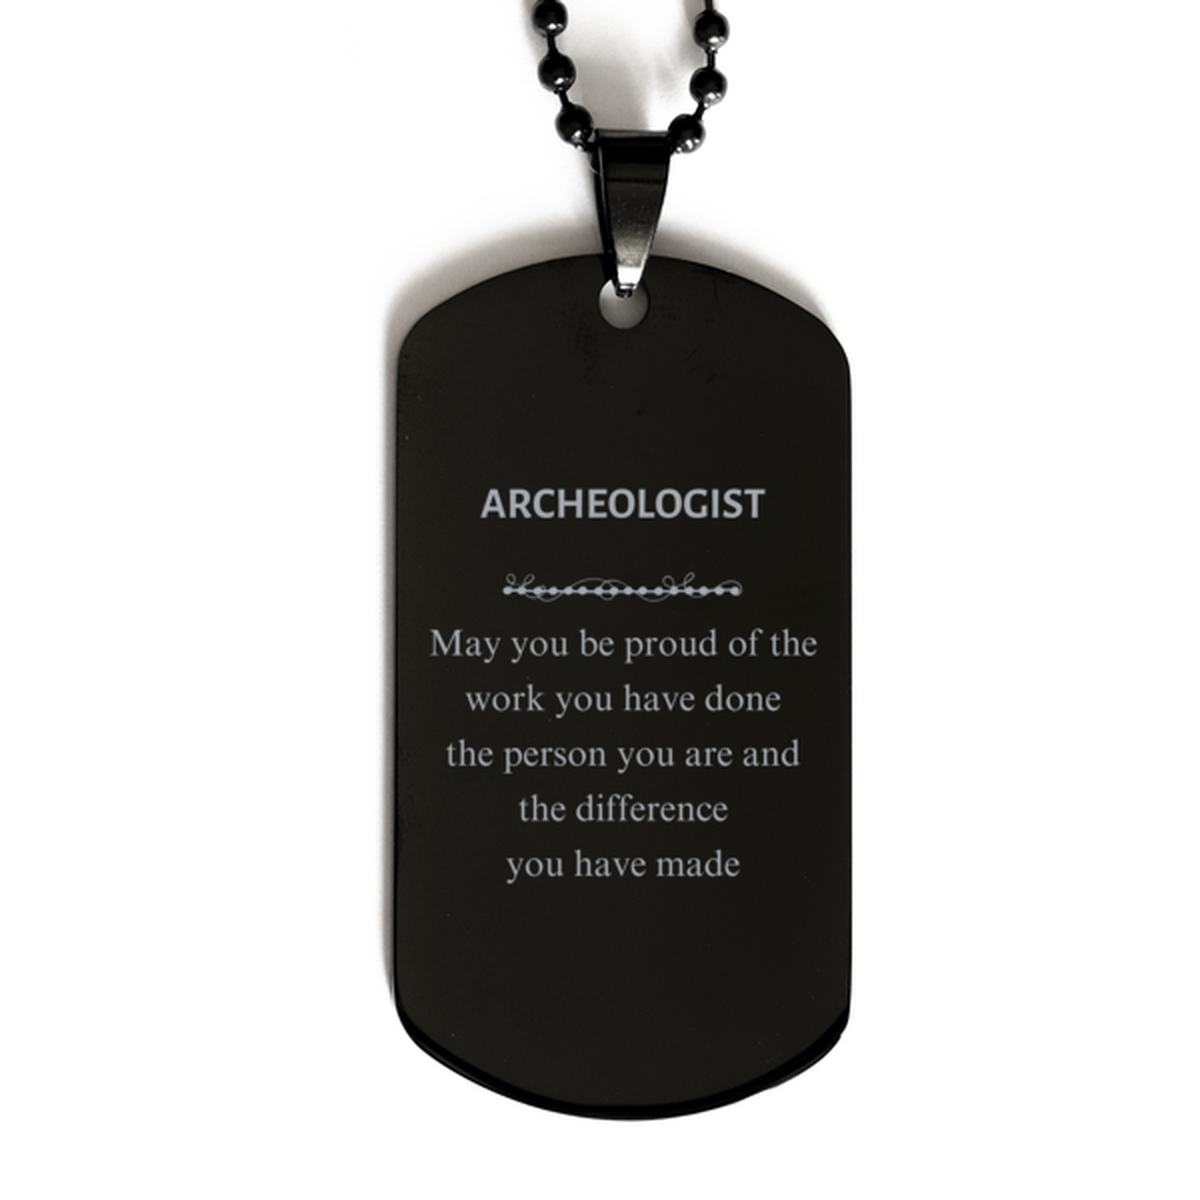 Archeologist May you be proud of the work you have done, Retirement Archeologist Black Dog Tag for Colleague Appreciation Gifts Amazing for Archeologist